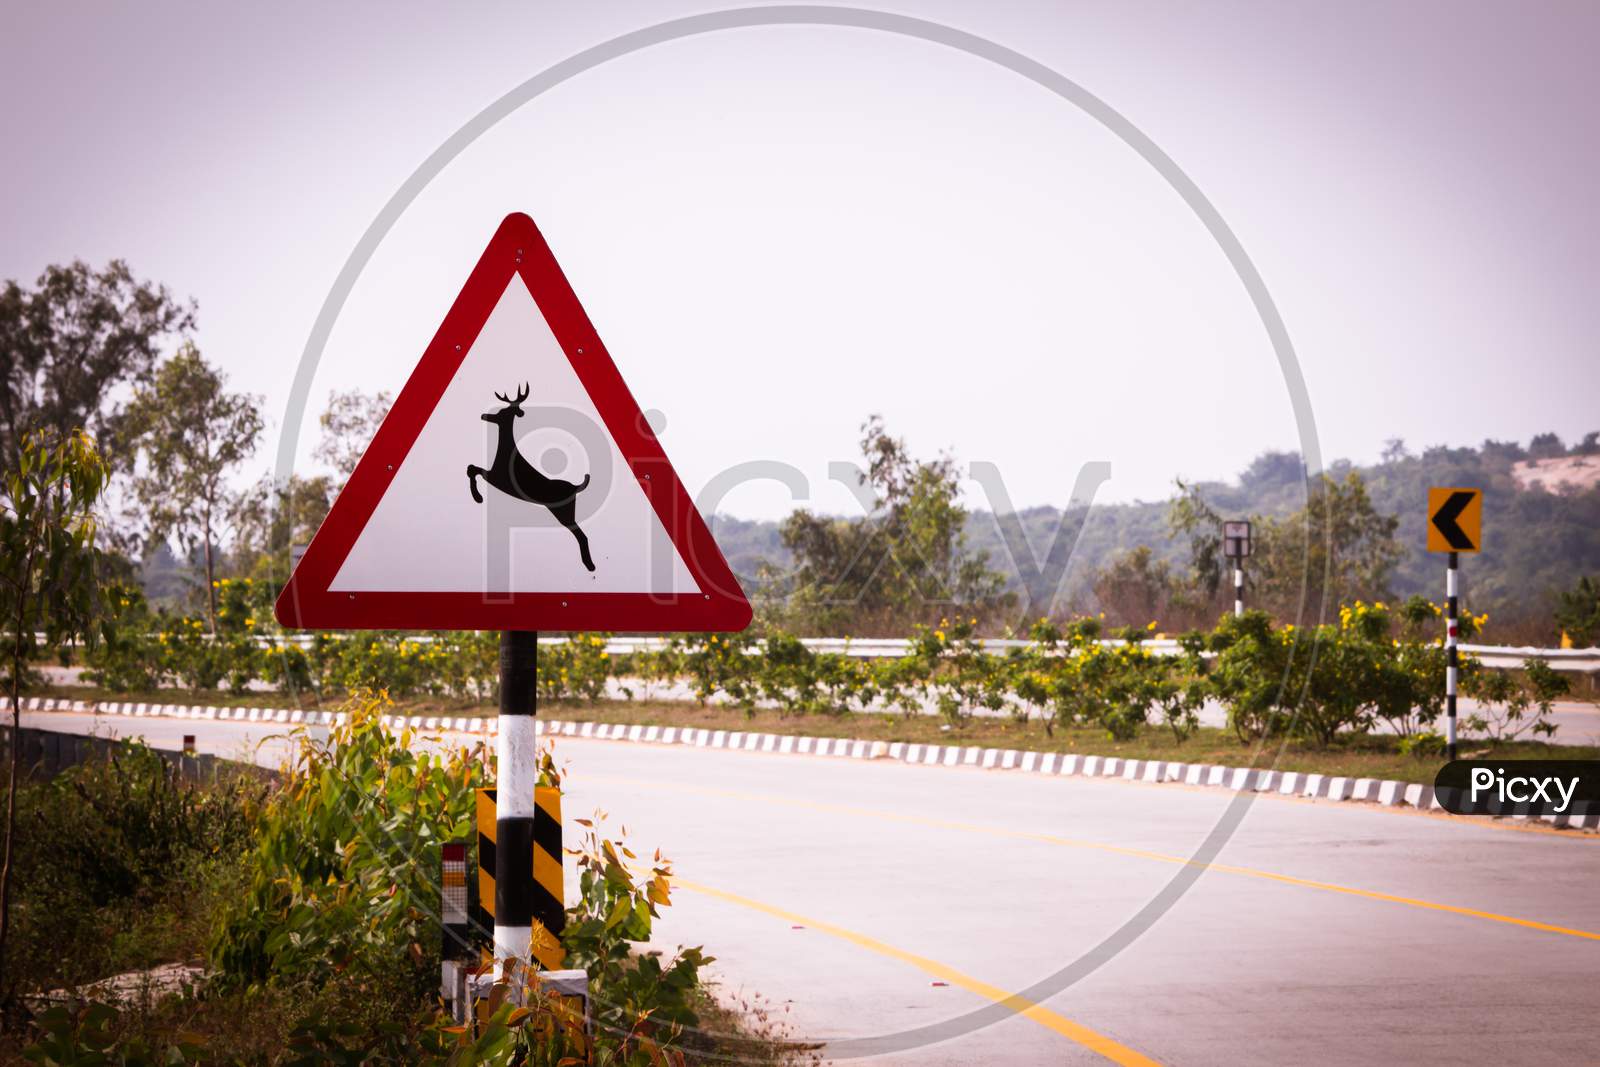 Indian Road Sign Indicating Deer Crossing. Sign Indicating To Watch Out For Wildlife Like Deer As The Road Pass Through Reserve Forest